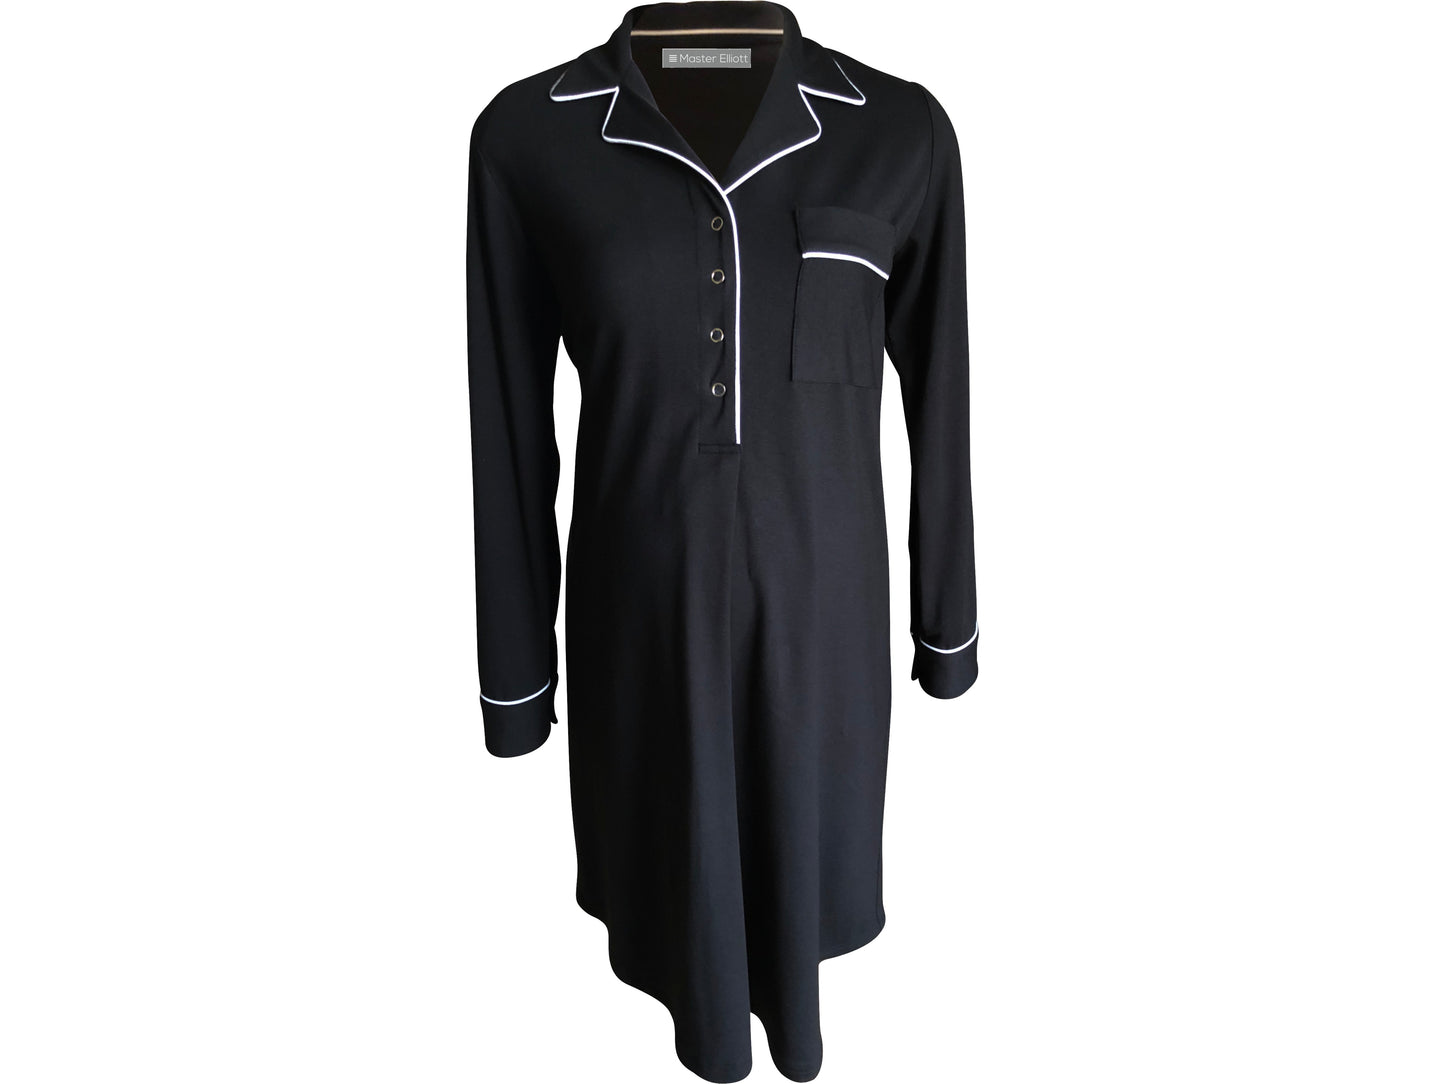 Master Elliott Luxury Maternity Nightgown in black, made in soft bamboo